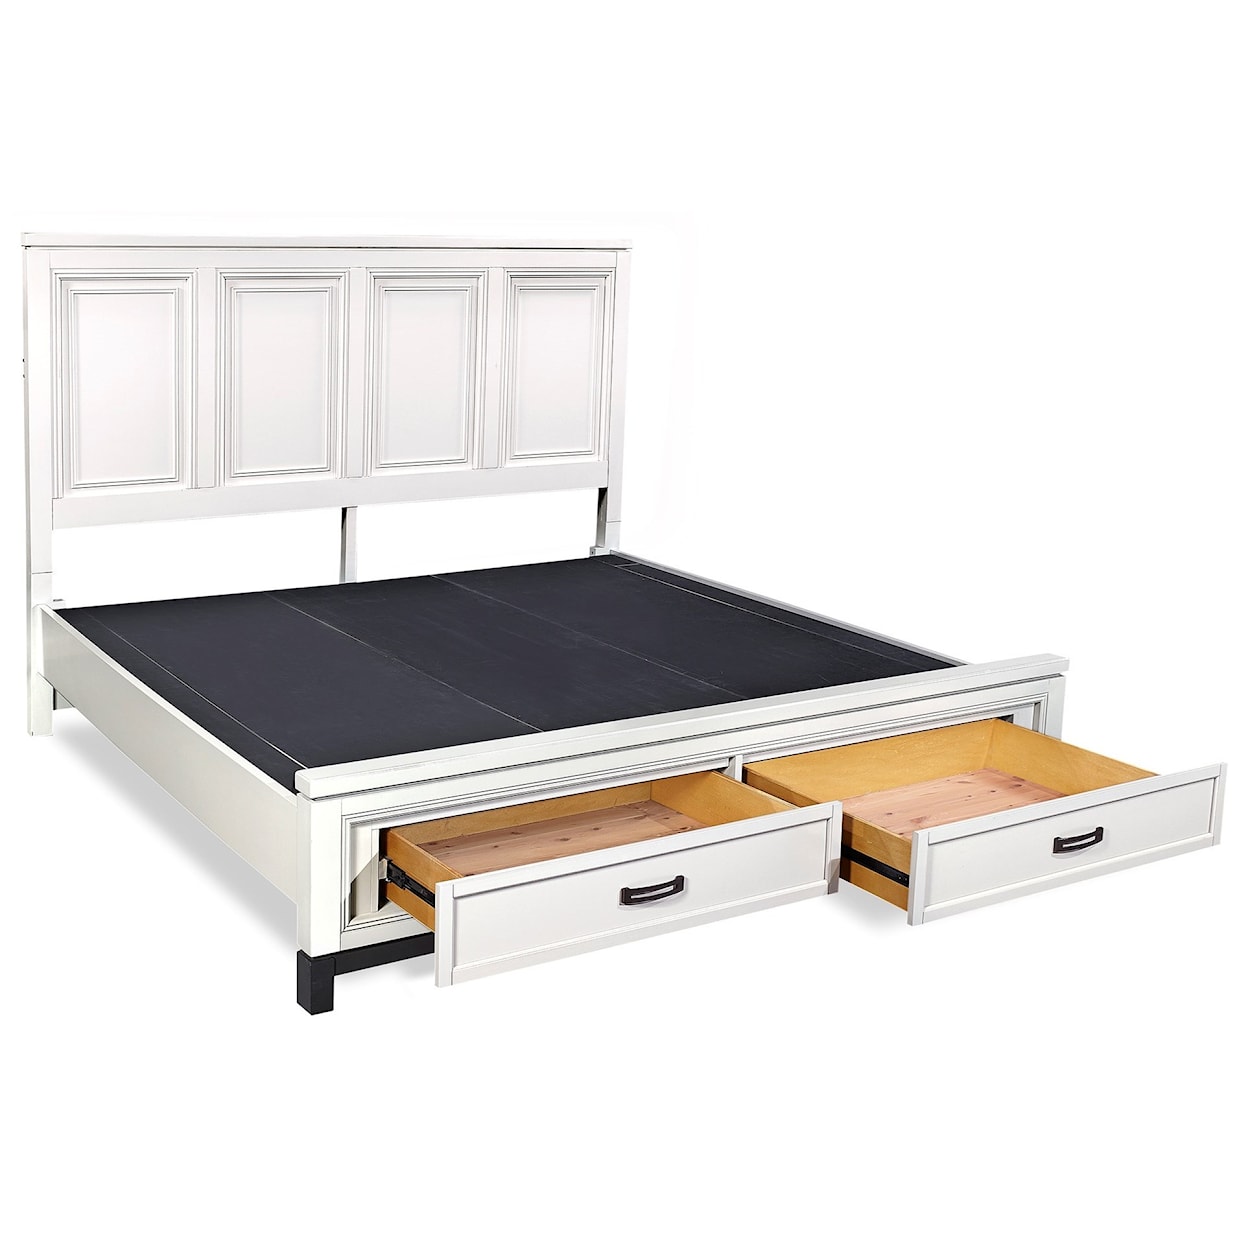 Aspenhome Hyde Park Cal King Painted Panel Storage Bed